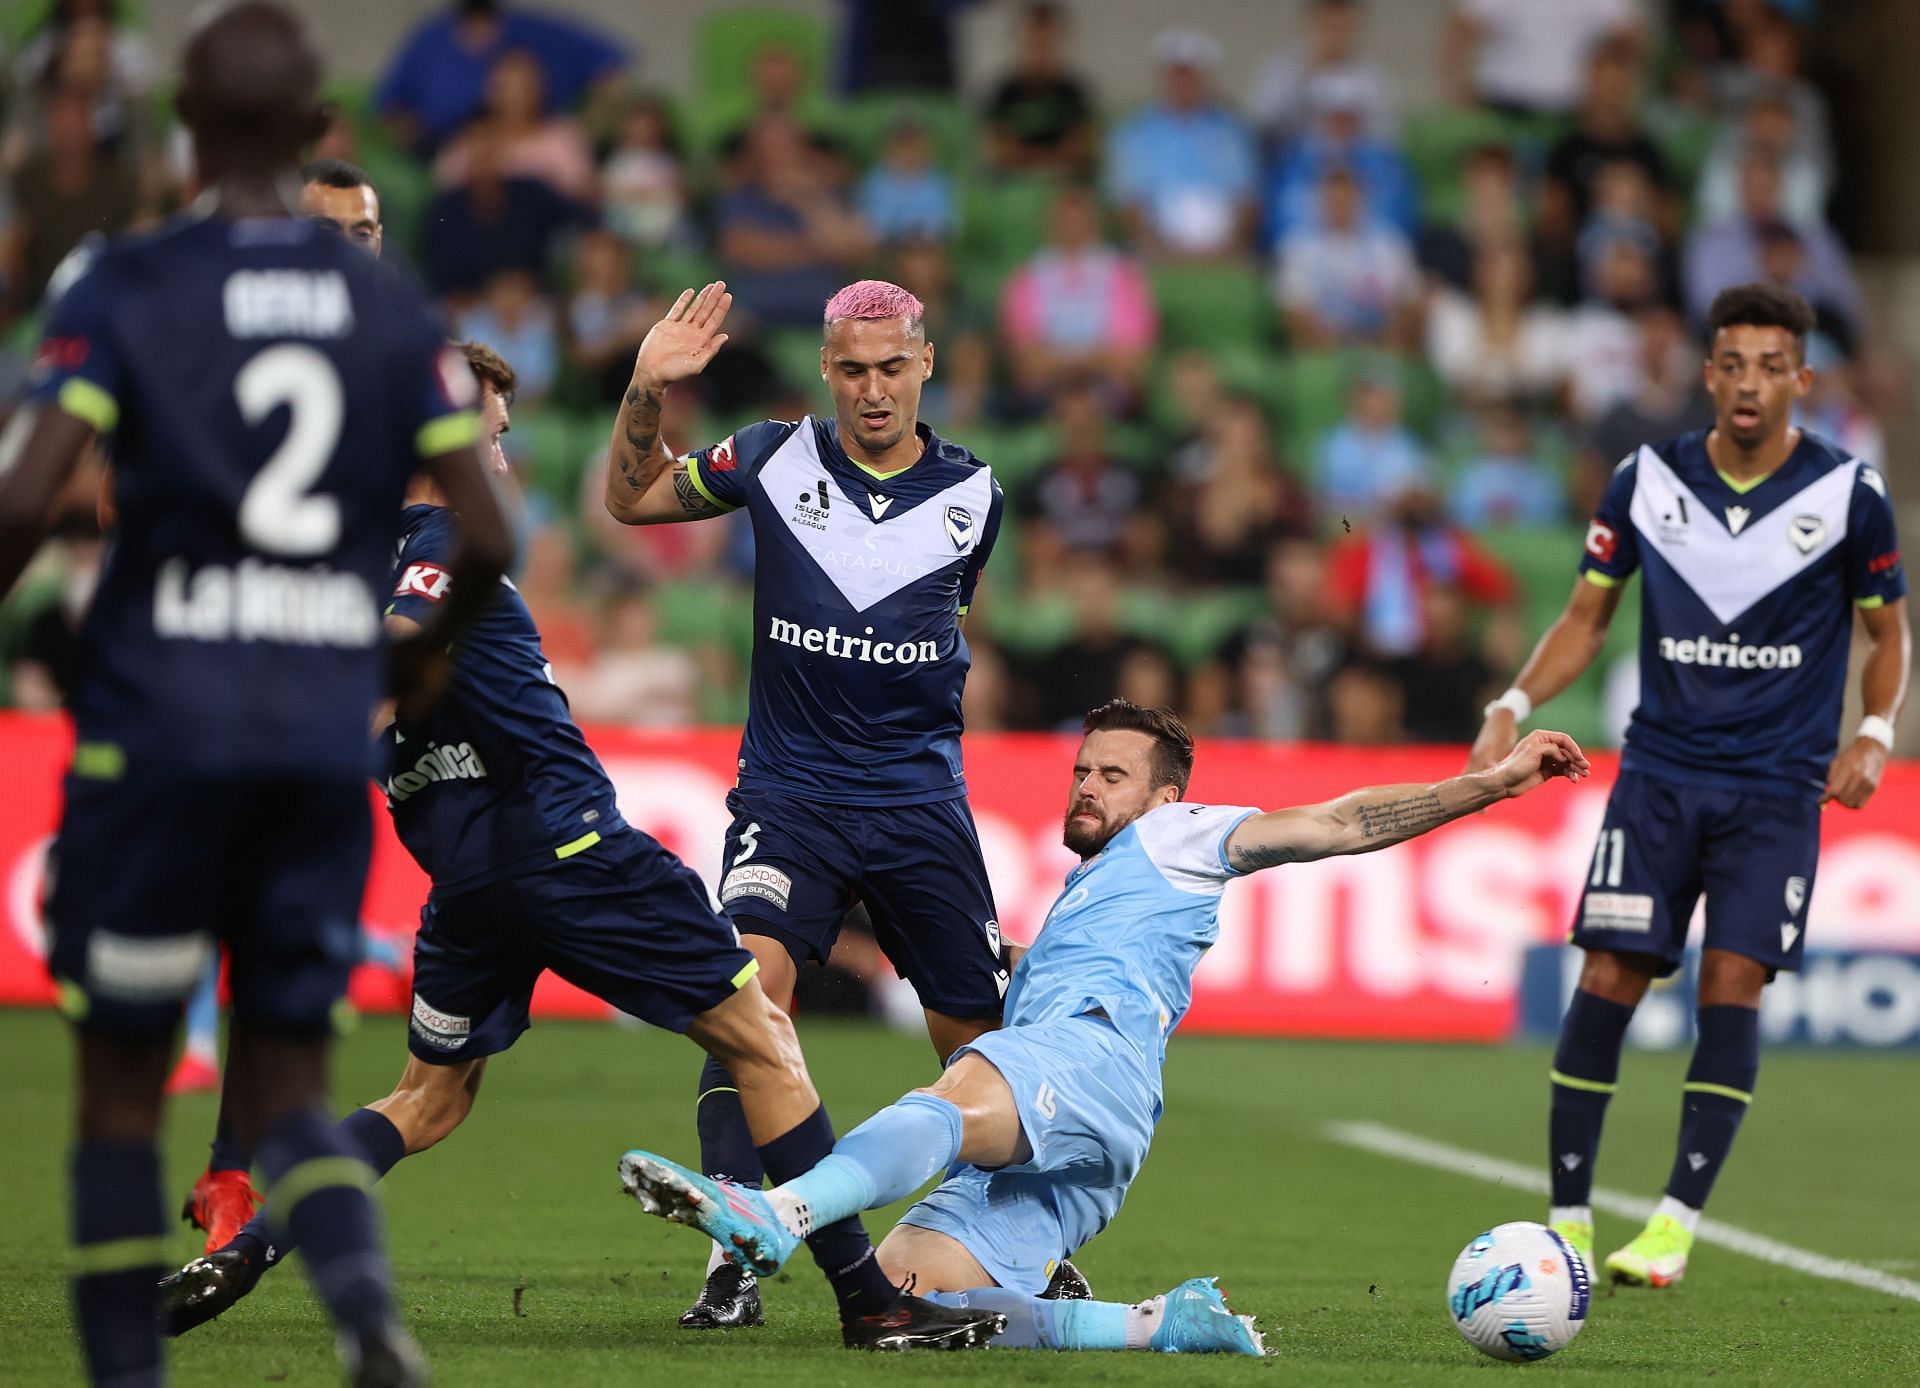 Melbourne City take on Melbourne Victory this weekend